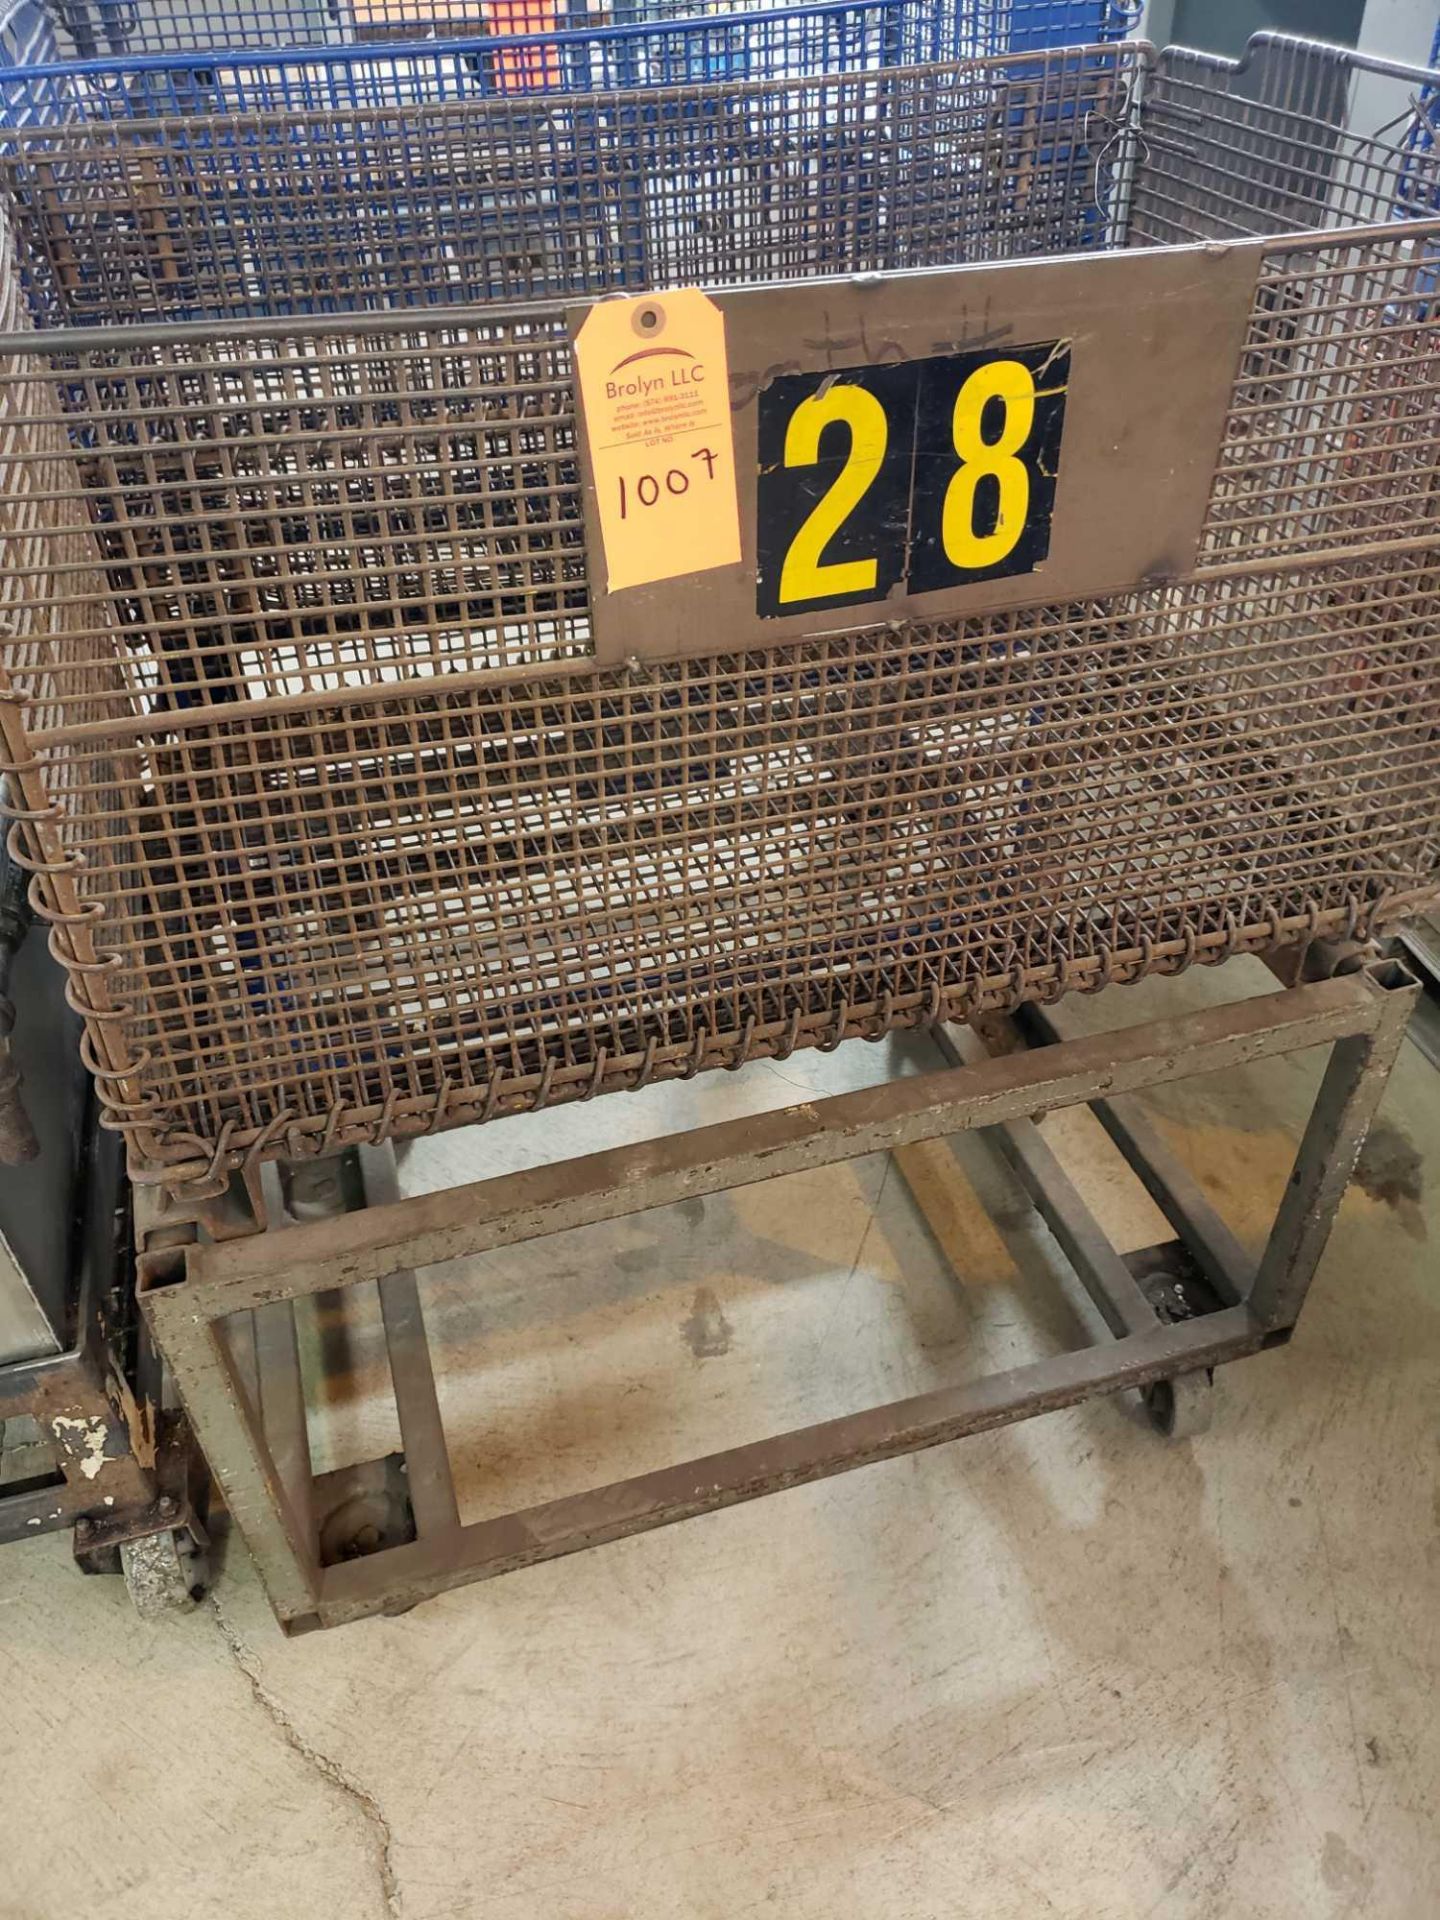 Cart with wire basket